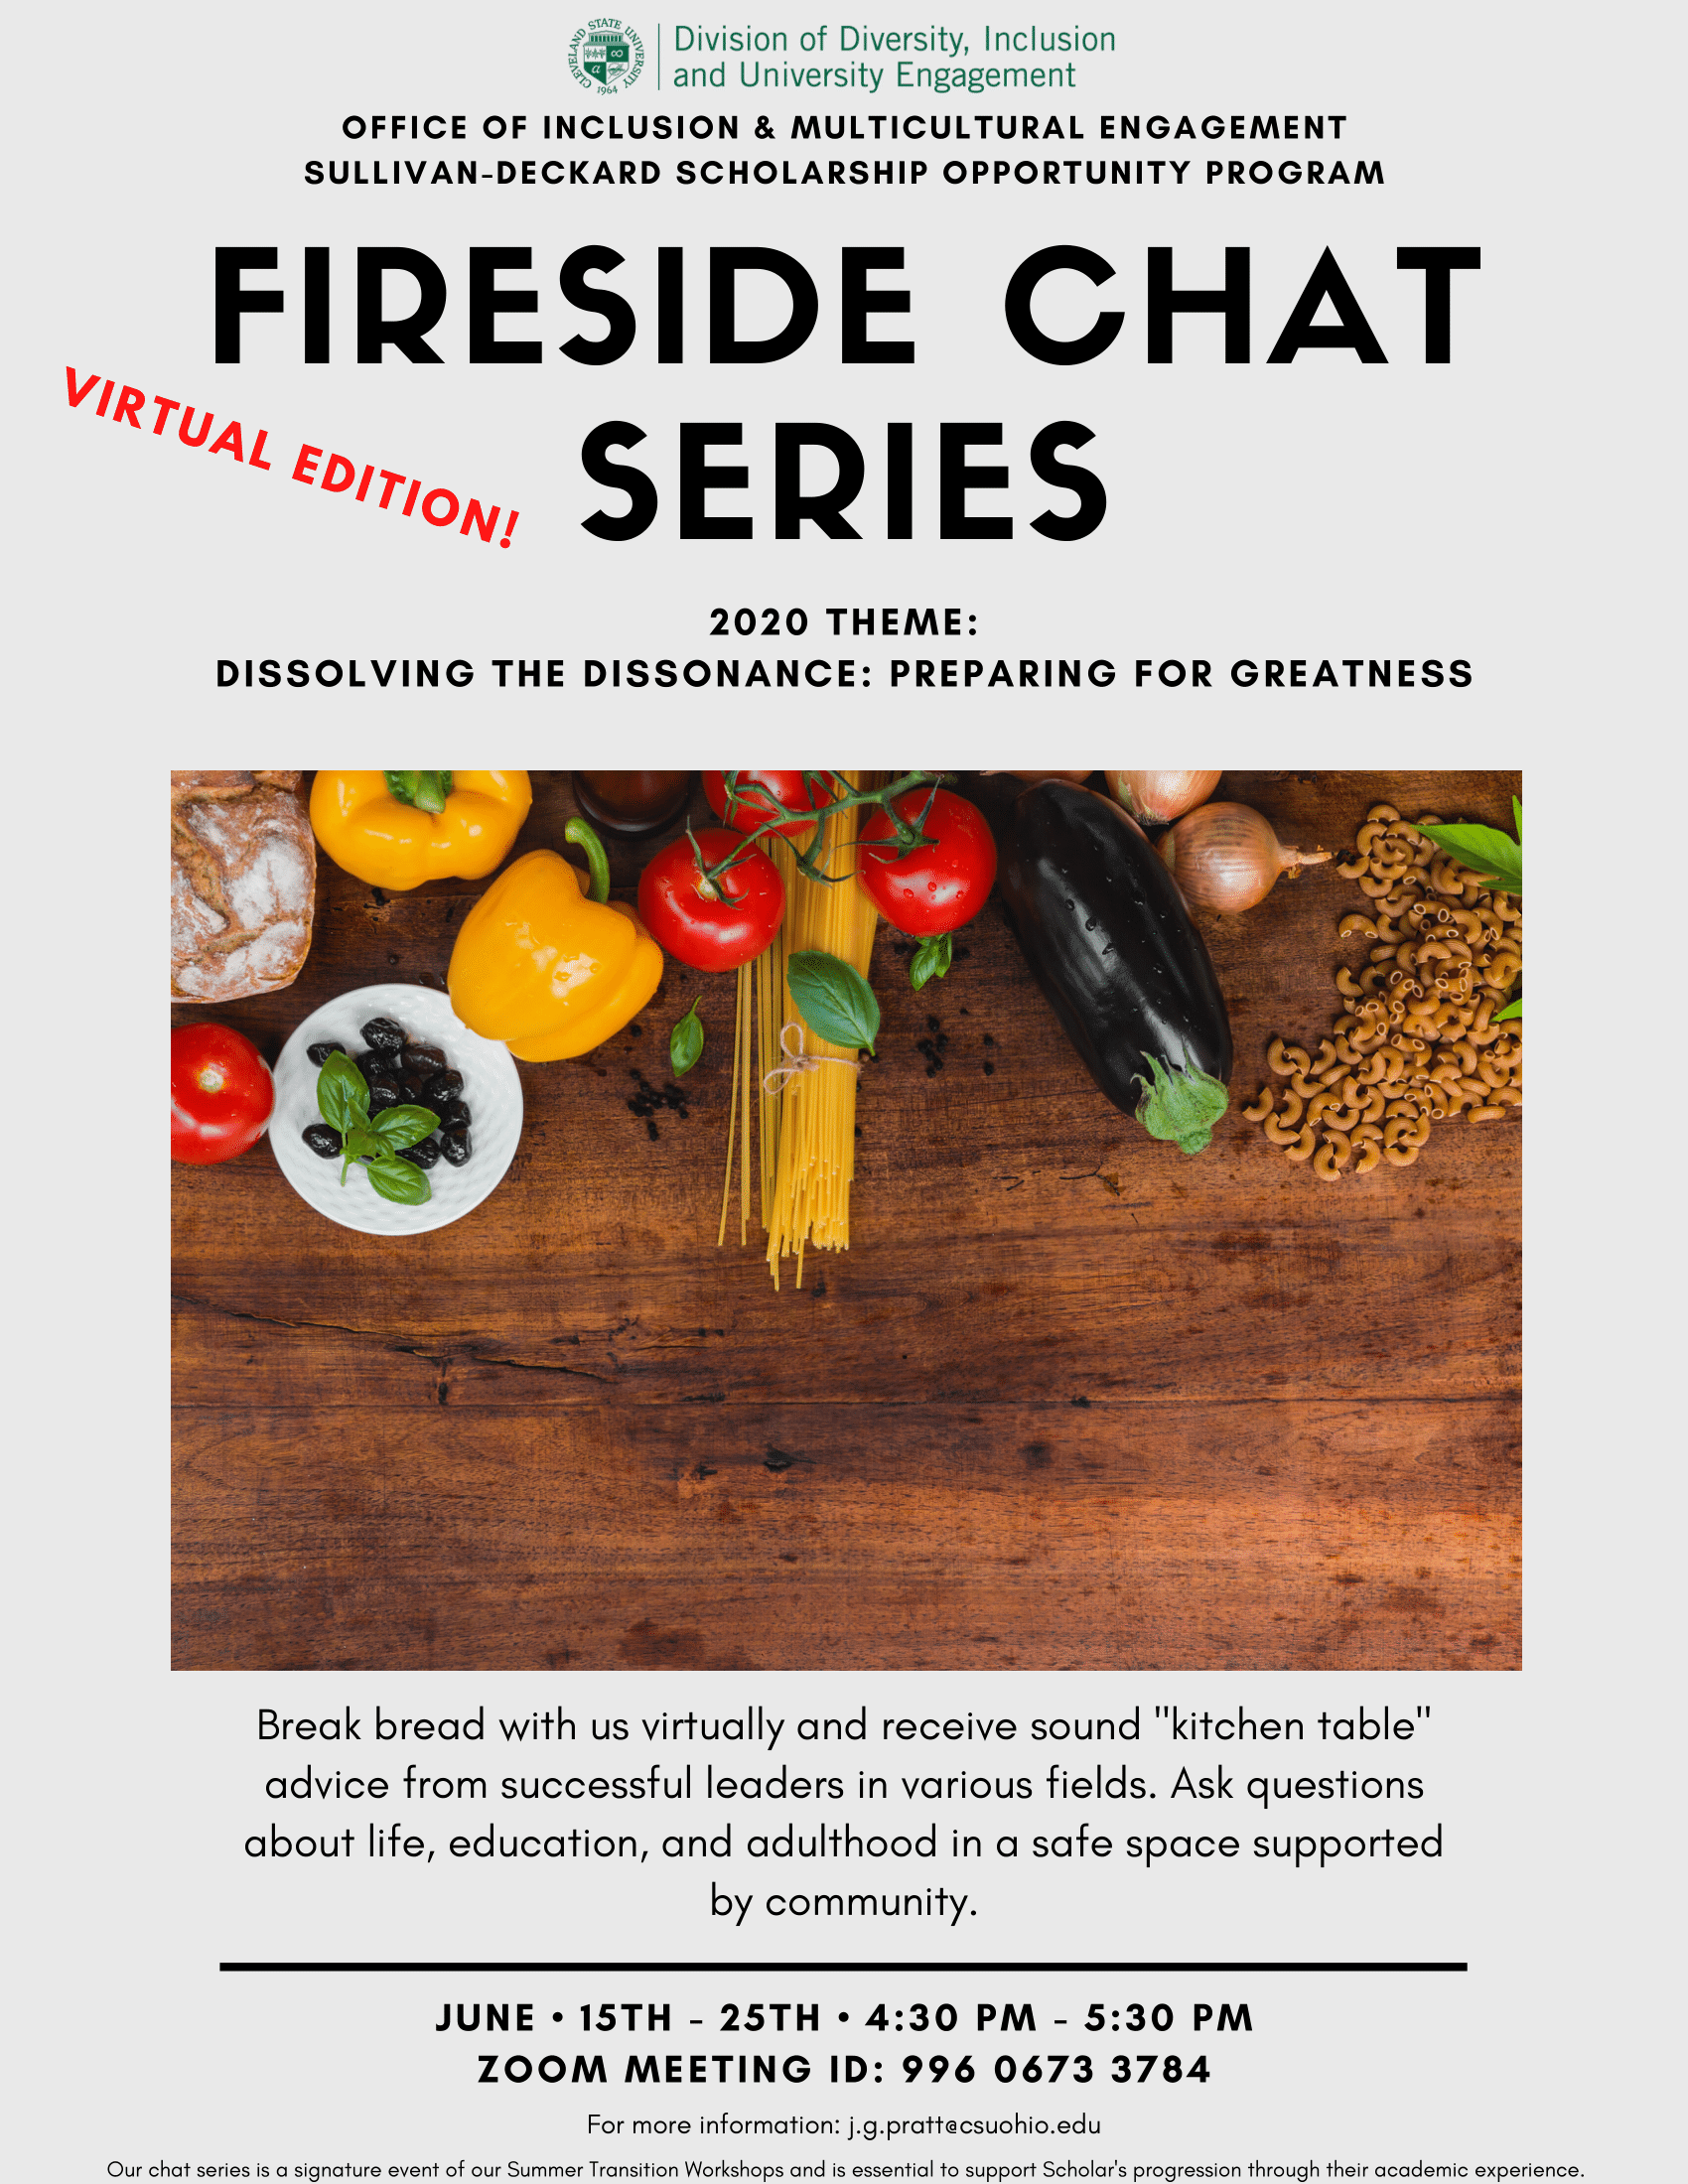 Fireside Chat Series